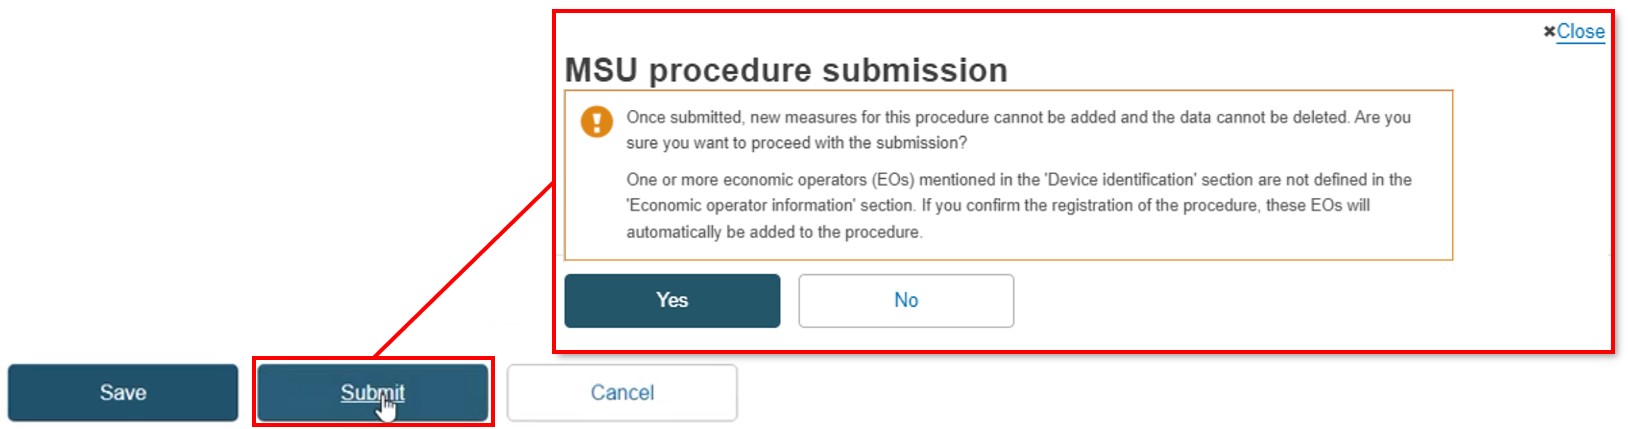 EUDAMED save, submit and cancel buttons and confirmation popup window with yes and no buttons